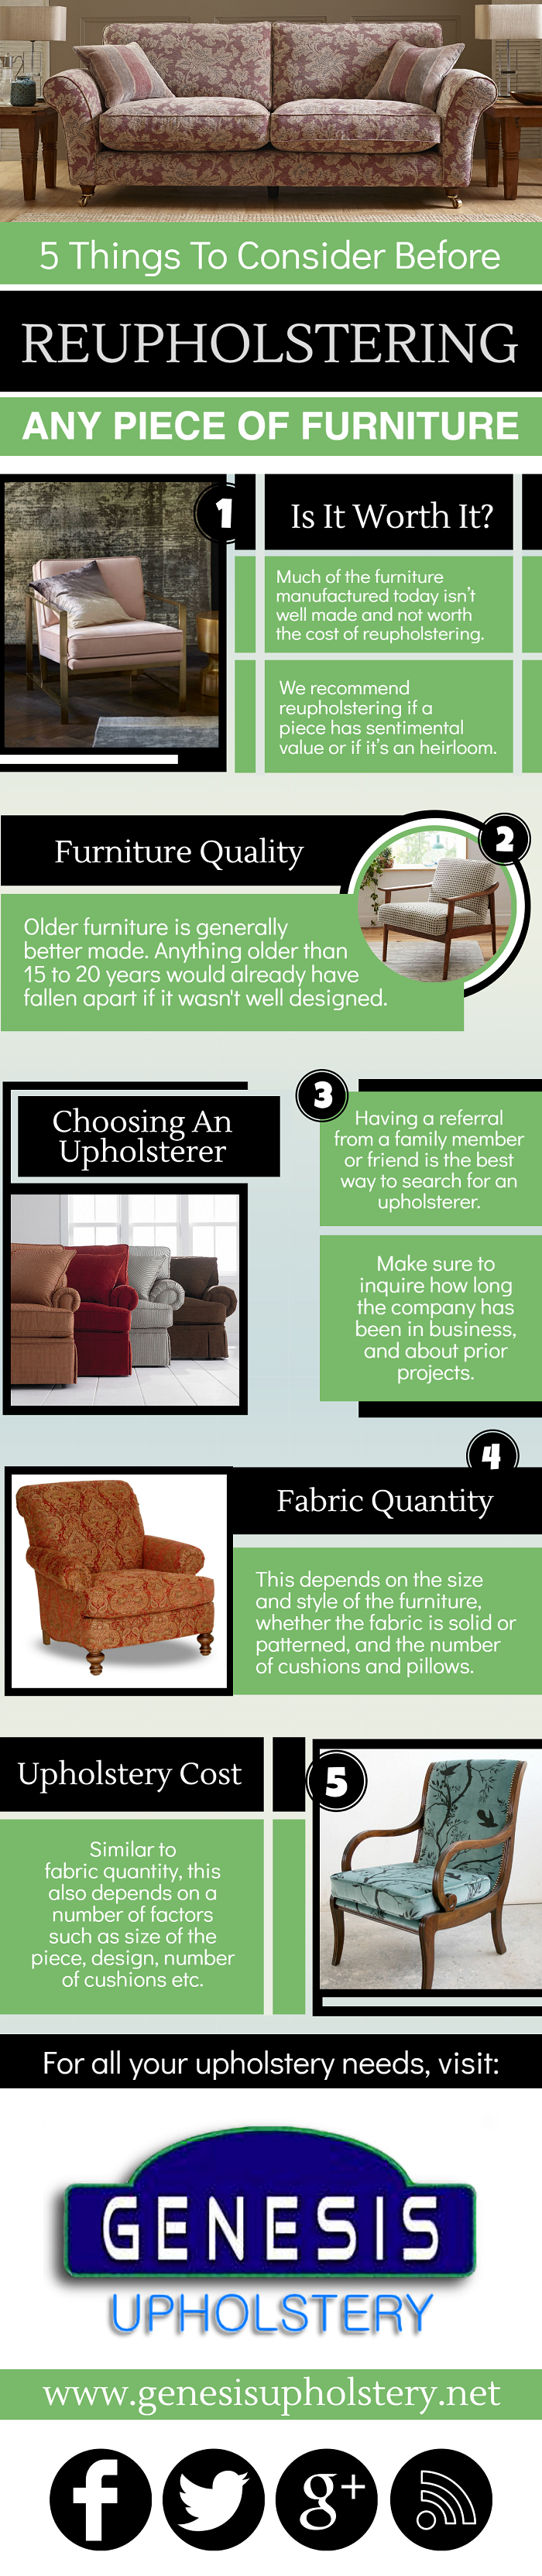 5 Things to Consider Before Reupholstering Any Piece of Furniture